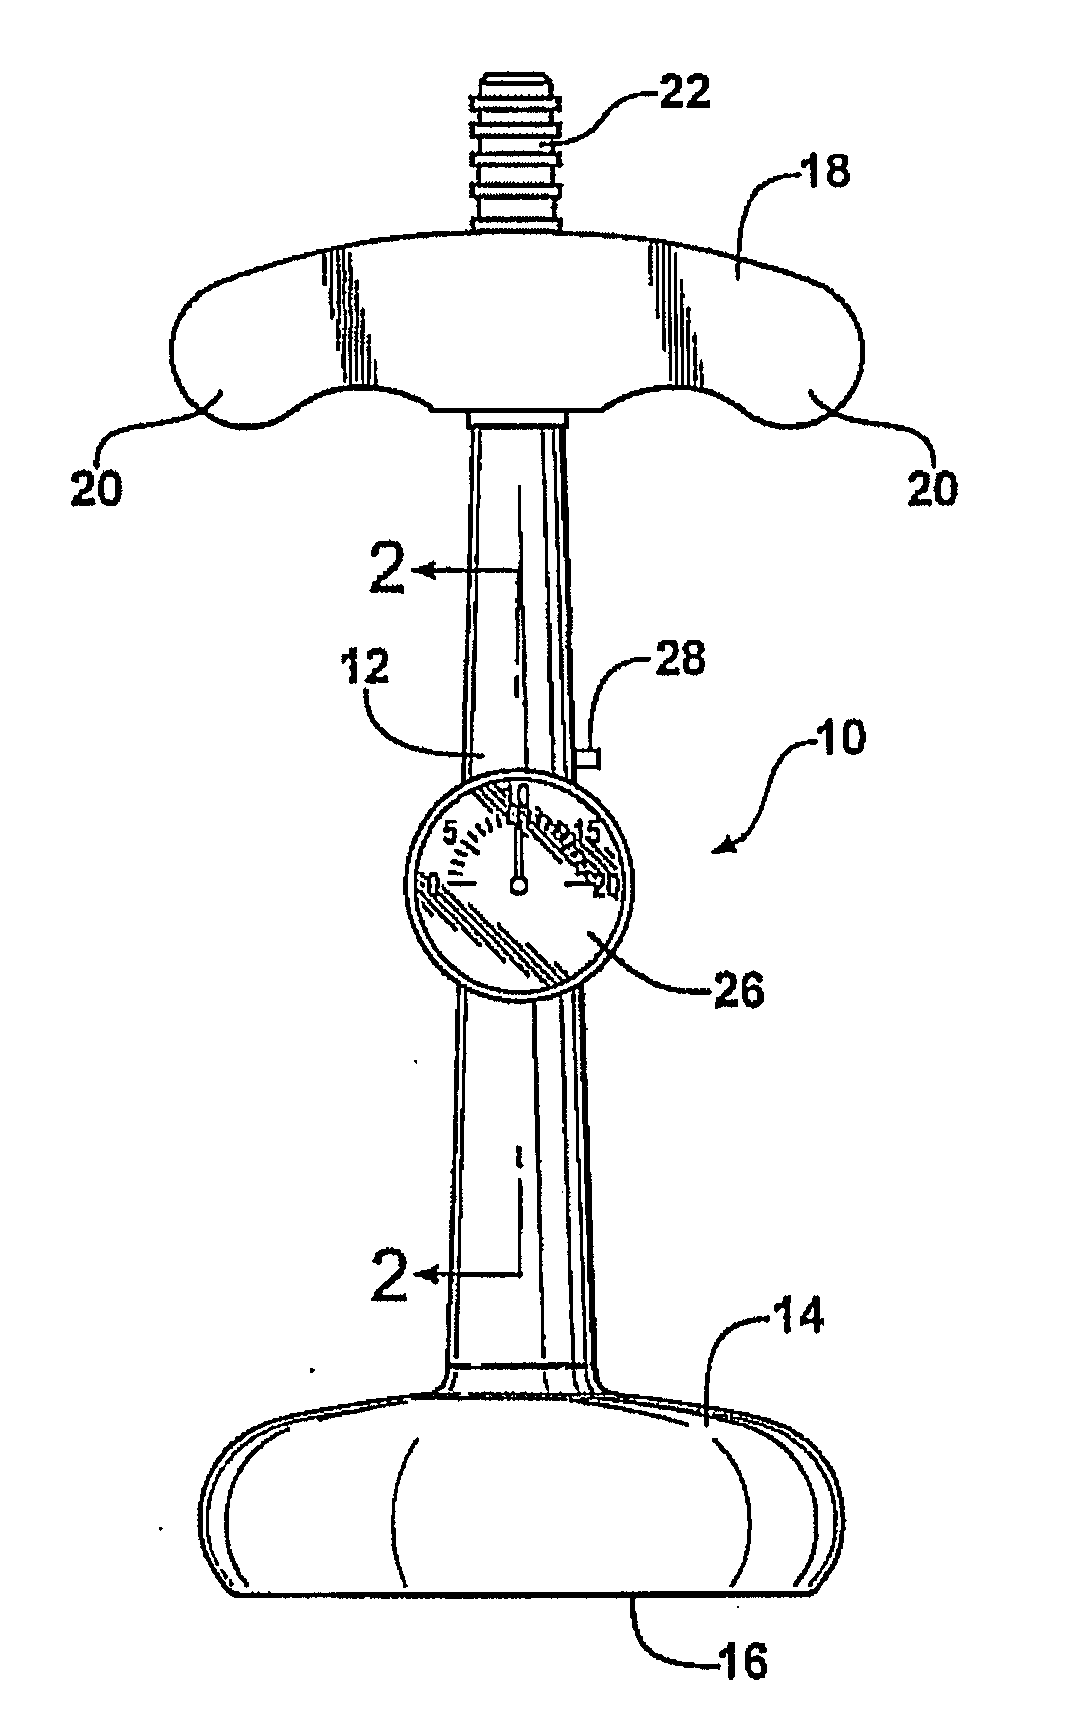 Obstetrical vacuum extractor with over-traction release